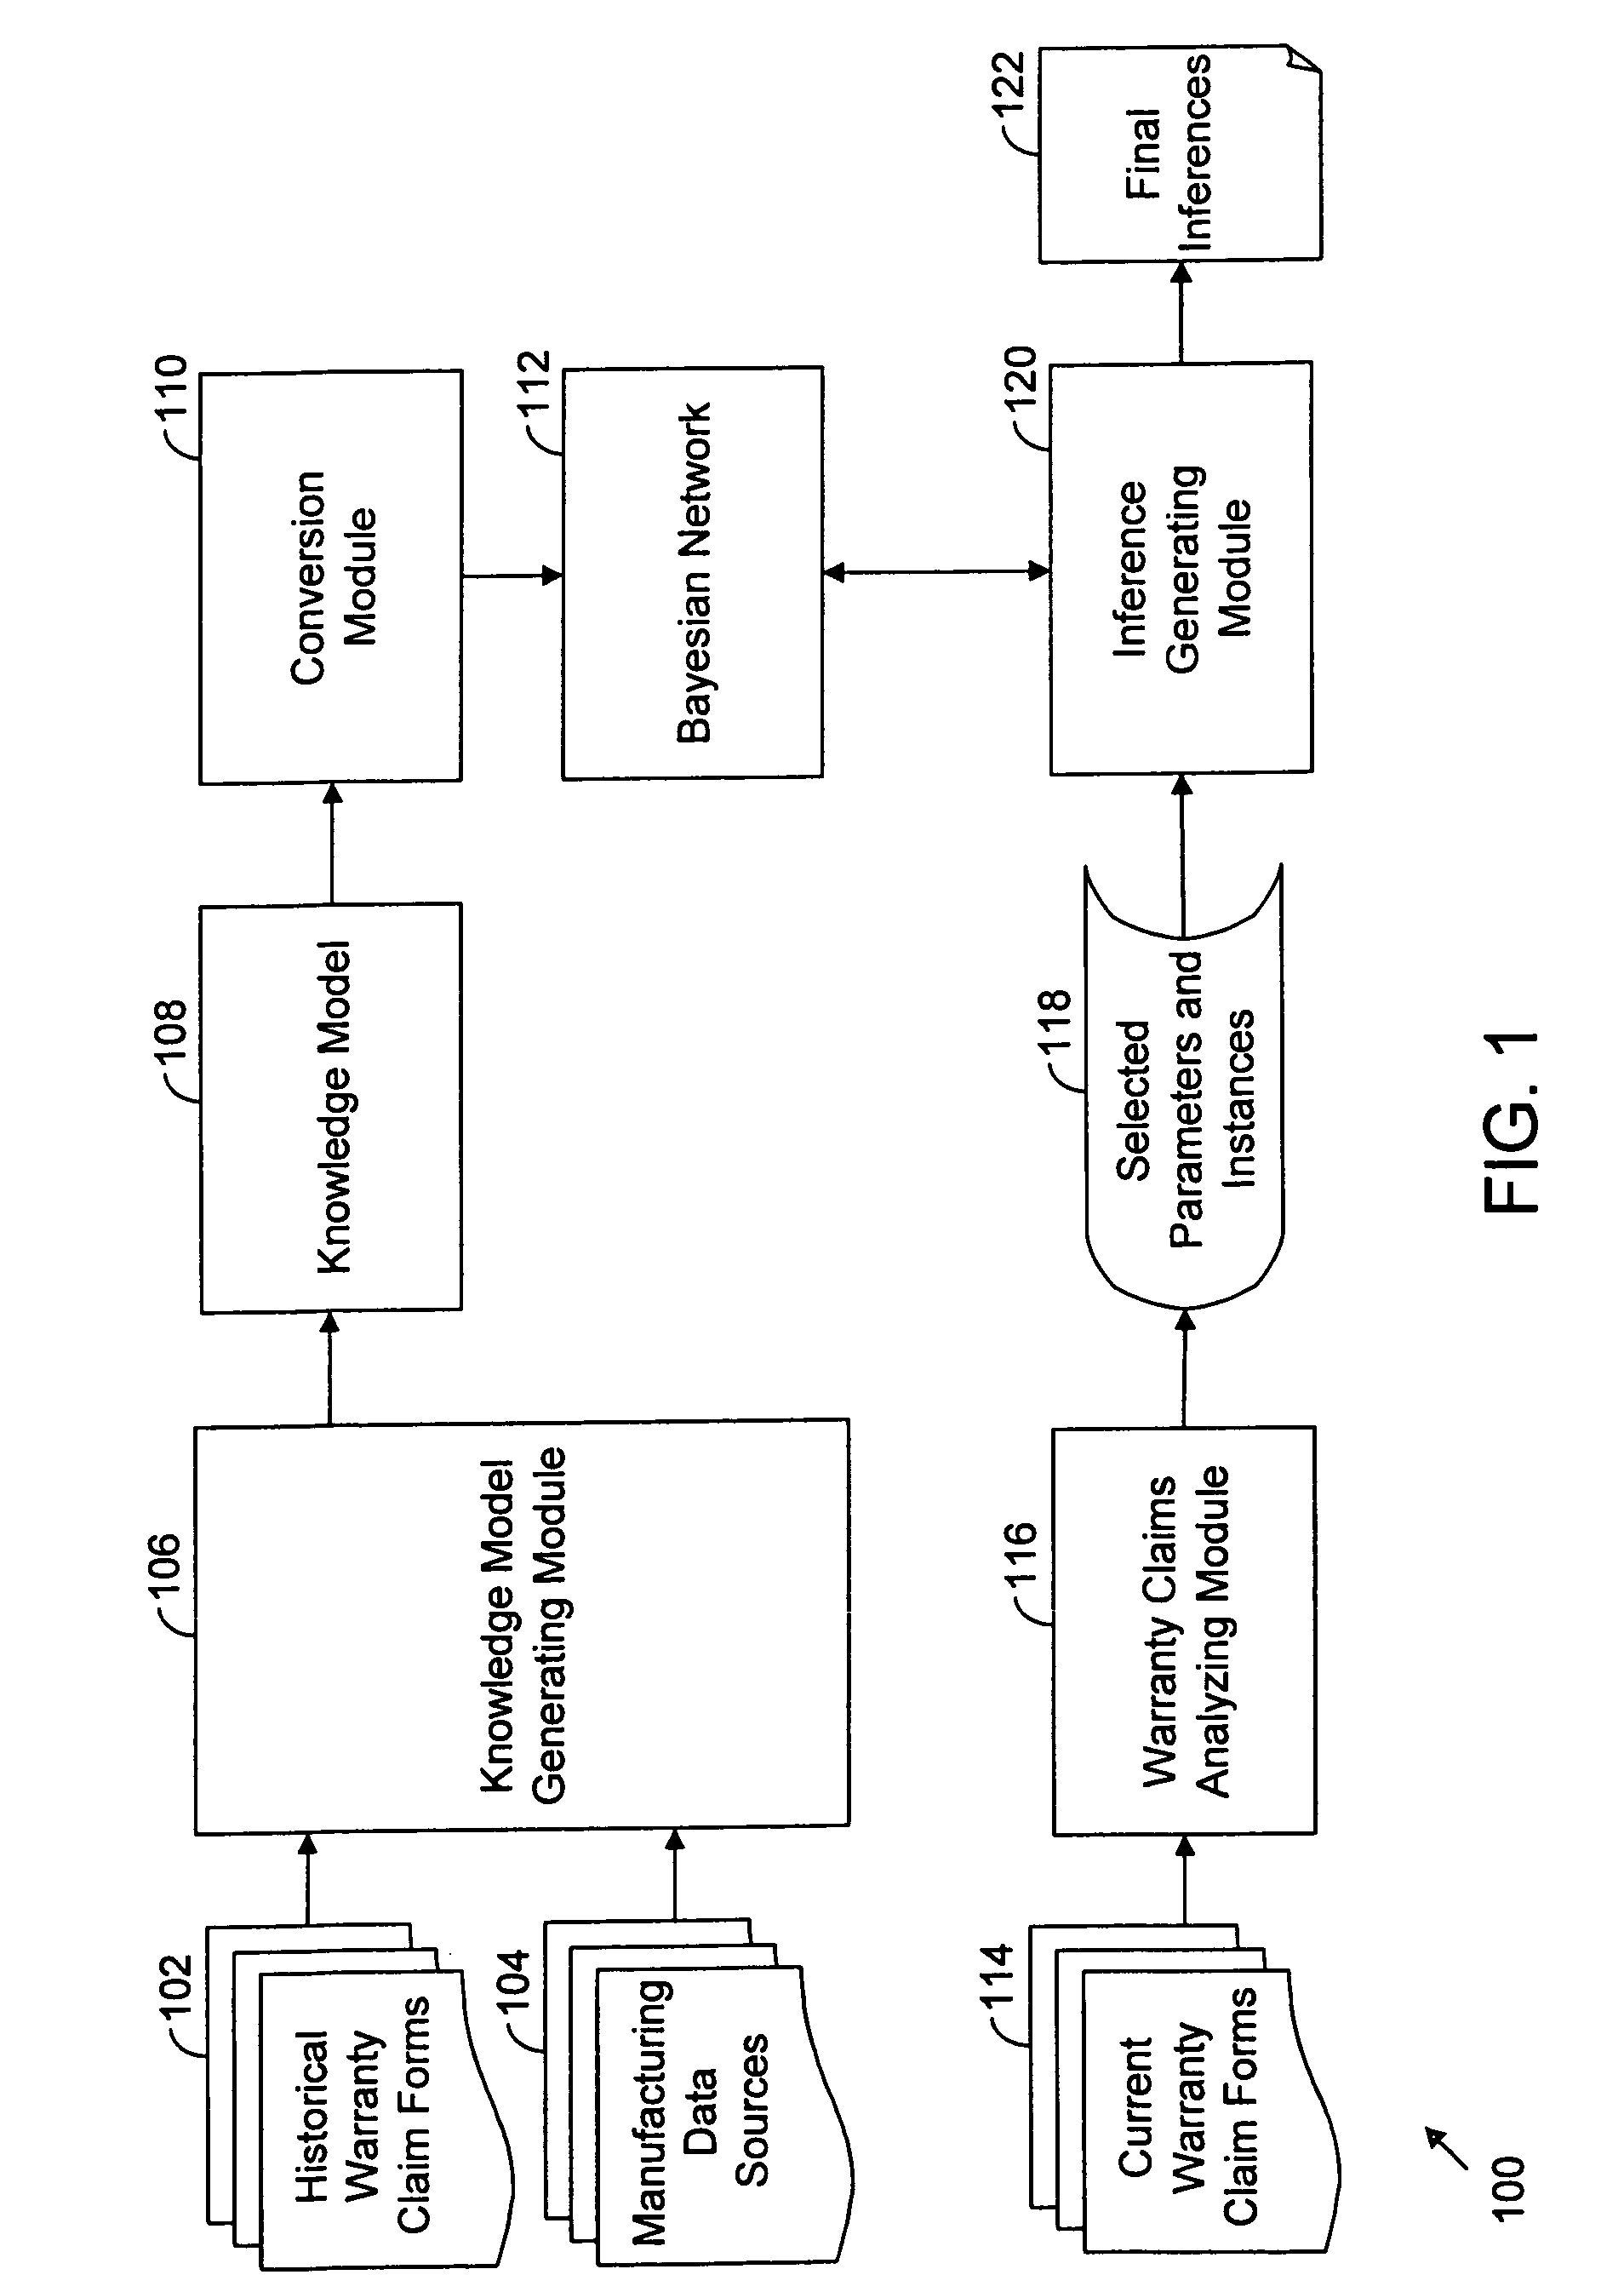 System and method for root cause analysis of the failure of a manufactured product